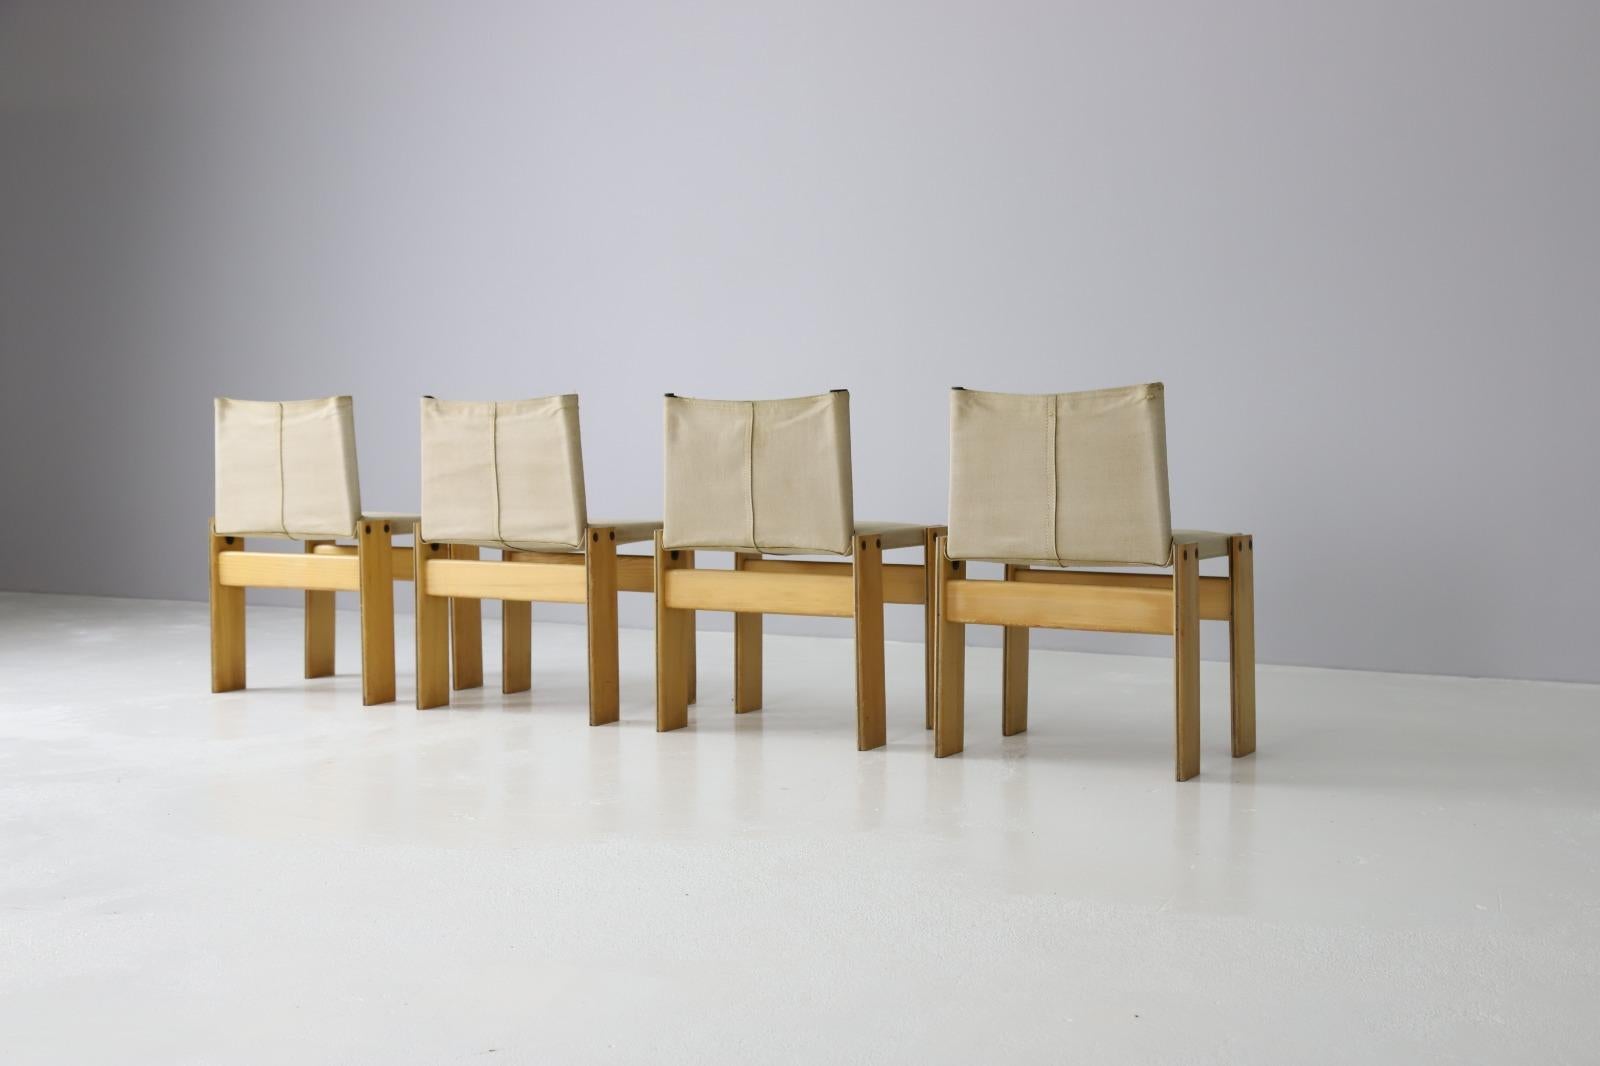 Set of 4 iconic 'Monk' chairs designed by Afra & Tobia Scarpa. Produced by Molteni in Italy 1974. The chairs feature original canvas upholstery and a pine wooden frame with dark wood inlay. One of the chairs has a damage on the top right corner.